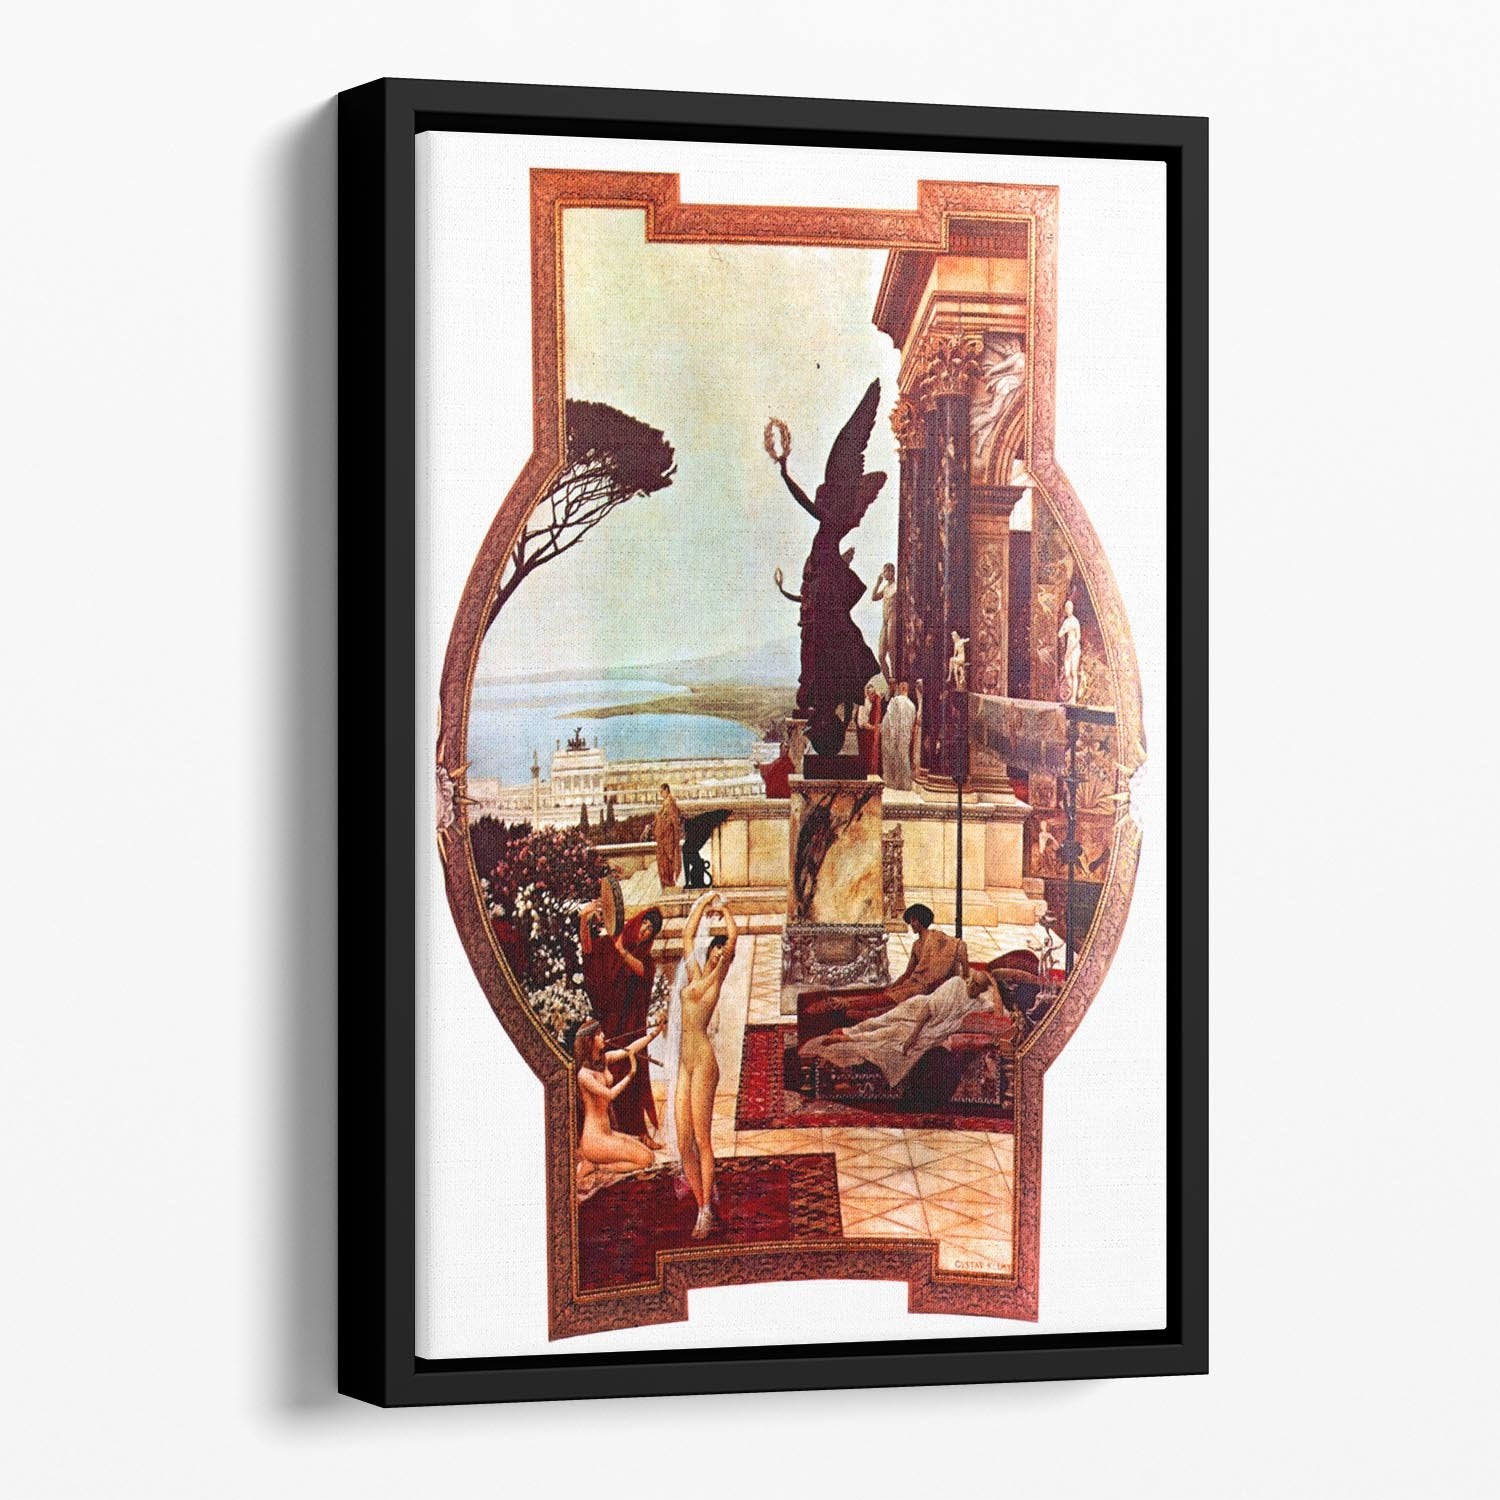 The Theatre of Taormina by Klimt Floating Framed Canvas